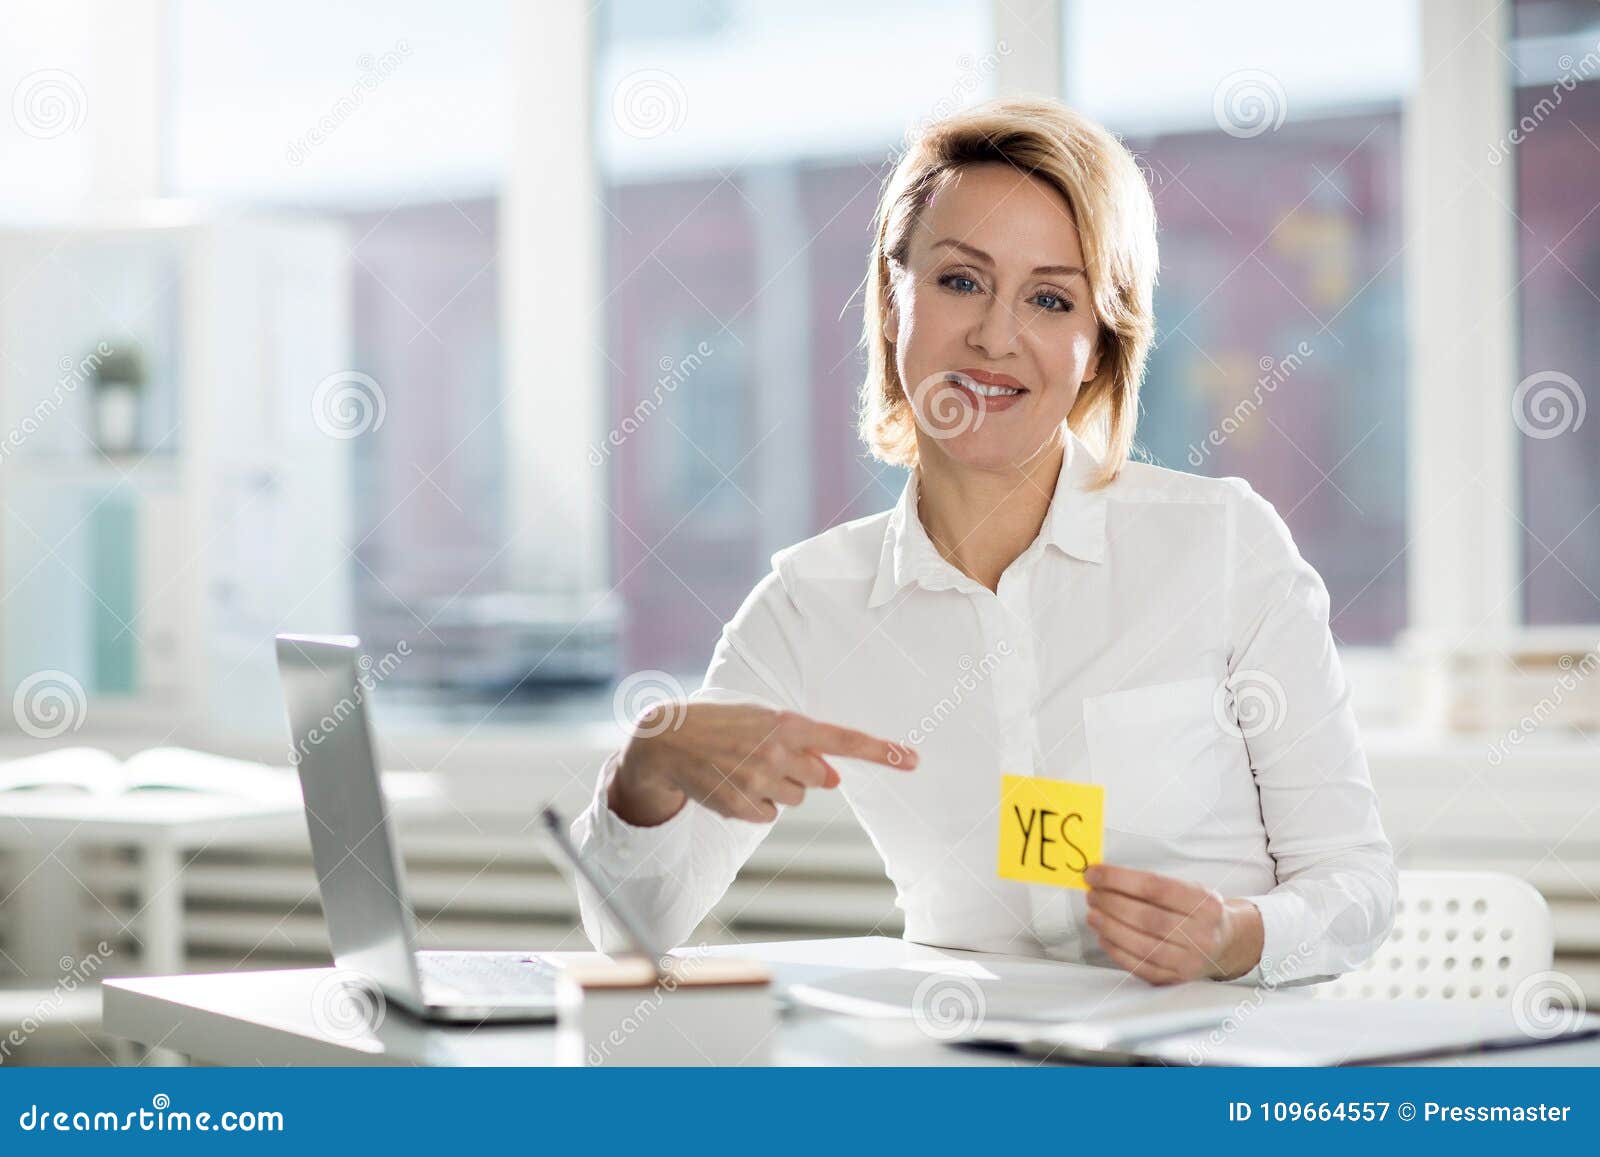 Answering Yes Stock Image Image Of Professional Vote 109664557